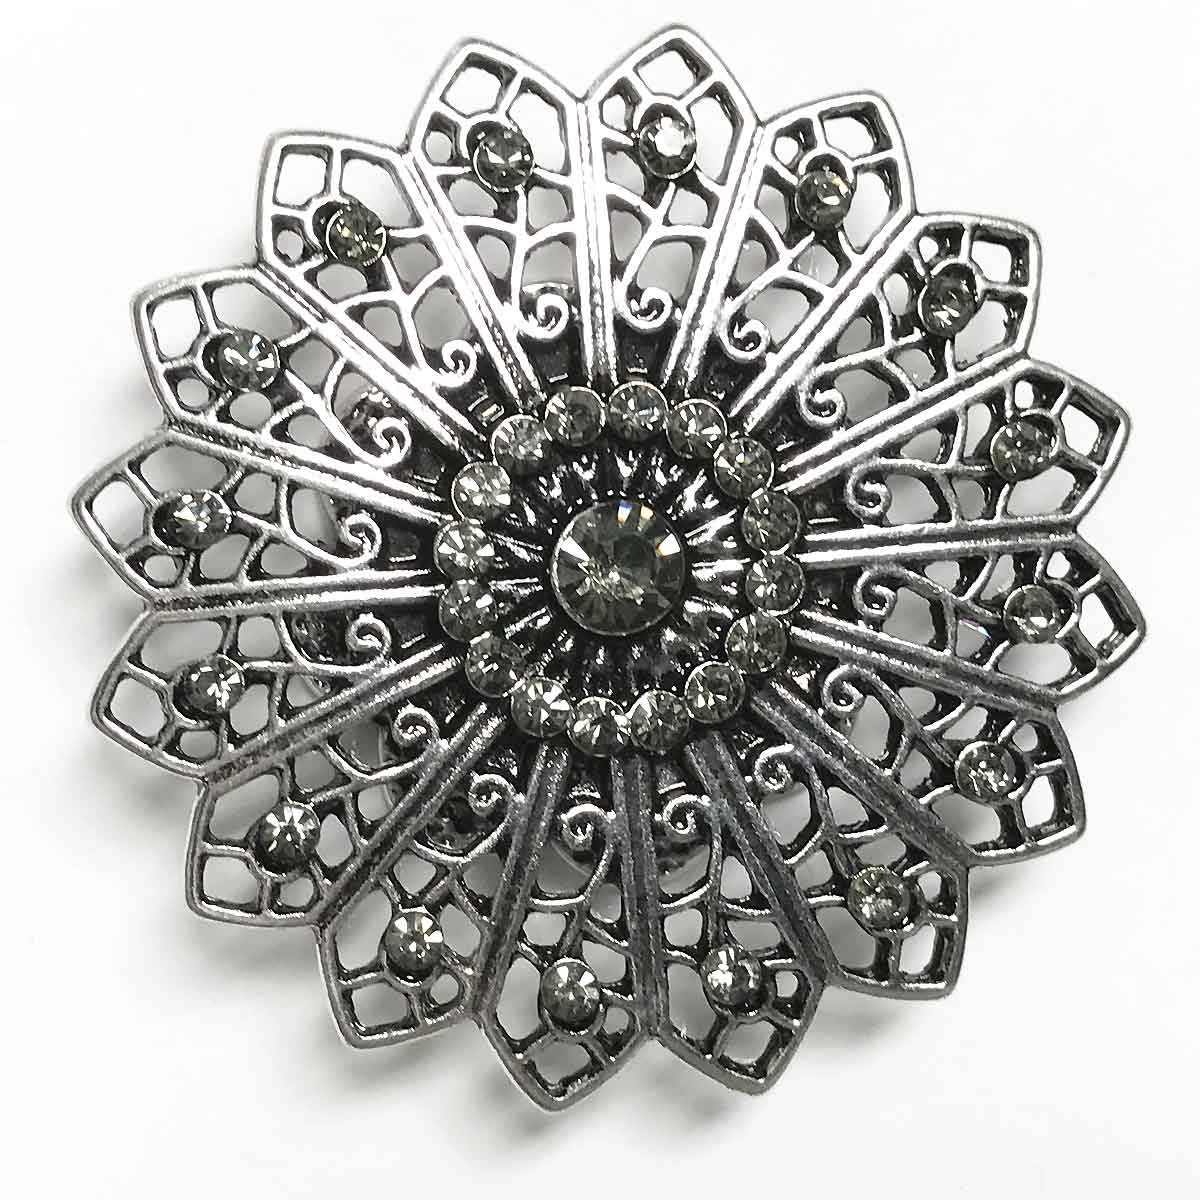 16 sided mandala. Magnetic Brooch for Scarves Artistic Sculptural shapes add a personality to absolutely anything you wish to put your stamp on! The Super Strong Magnet is enough for a jacket lapel! Use to hold a sarong or cardigan together.  Great to adorn a hat or to hold a scarf in place with Fabric Safe Magnet.